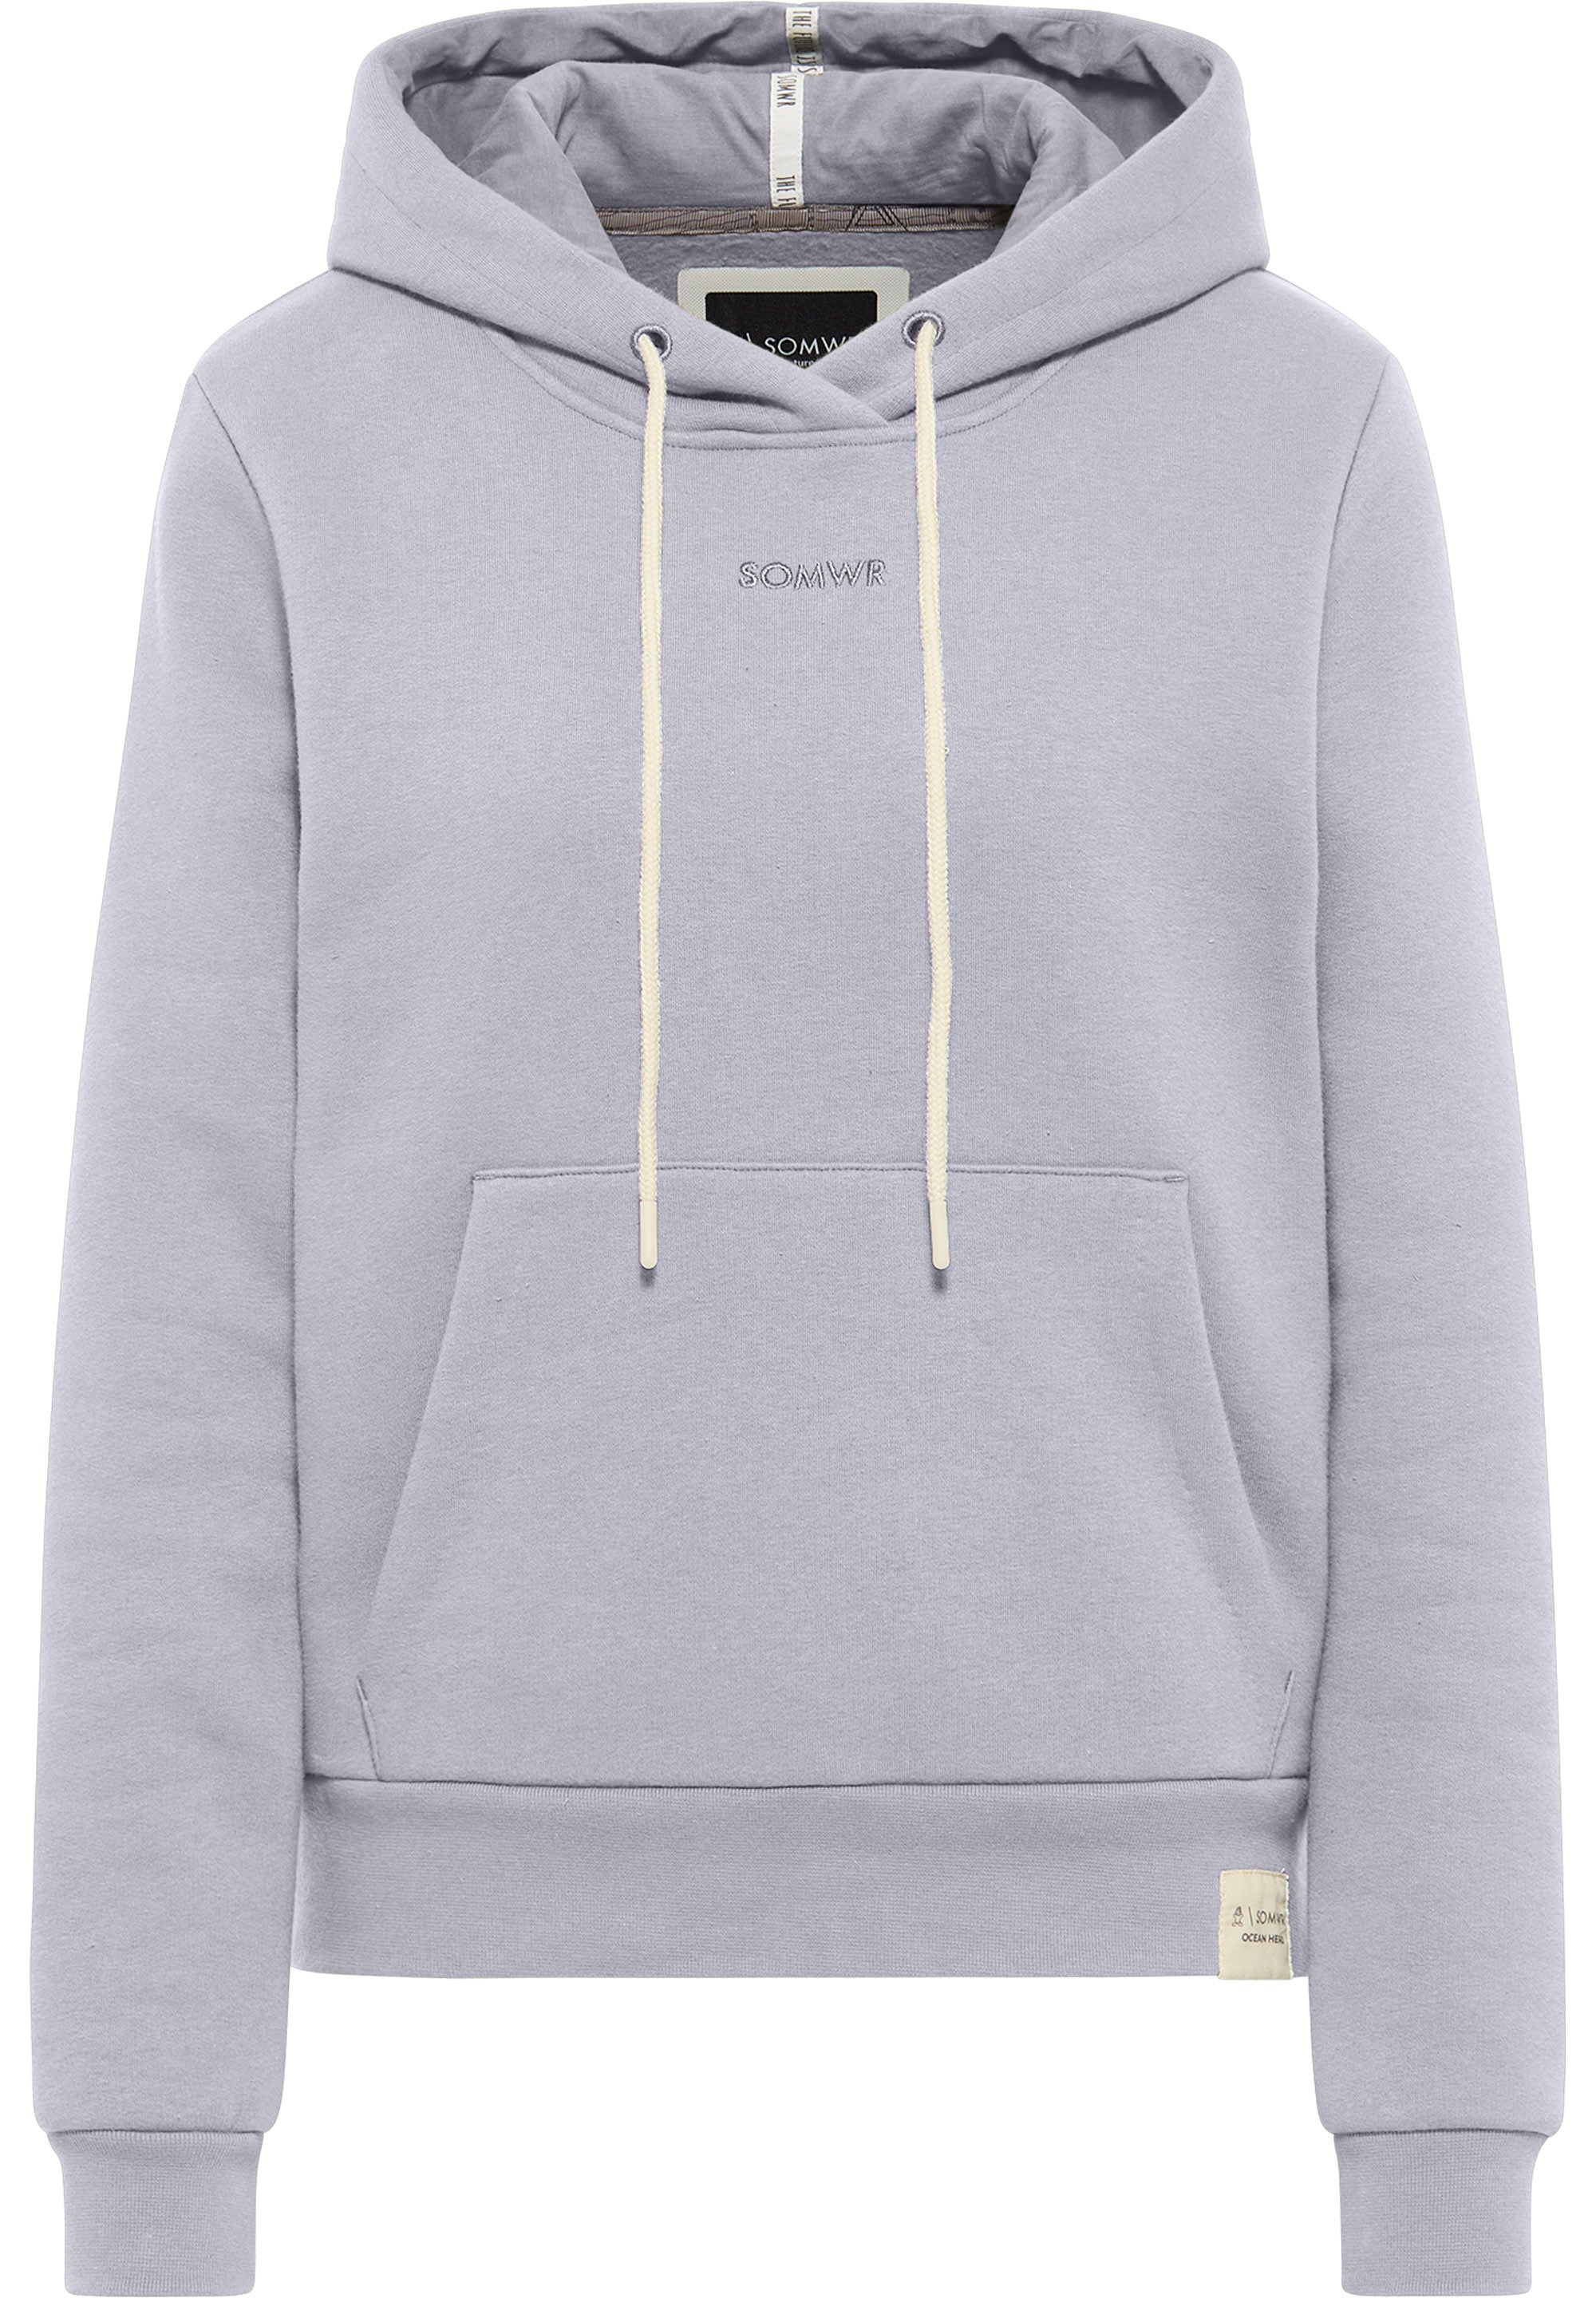 SOMWR REGROW Hoodie GRY070